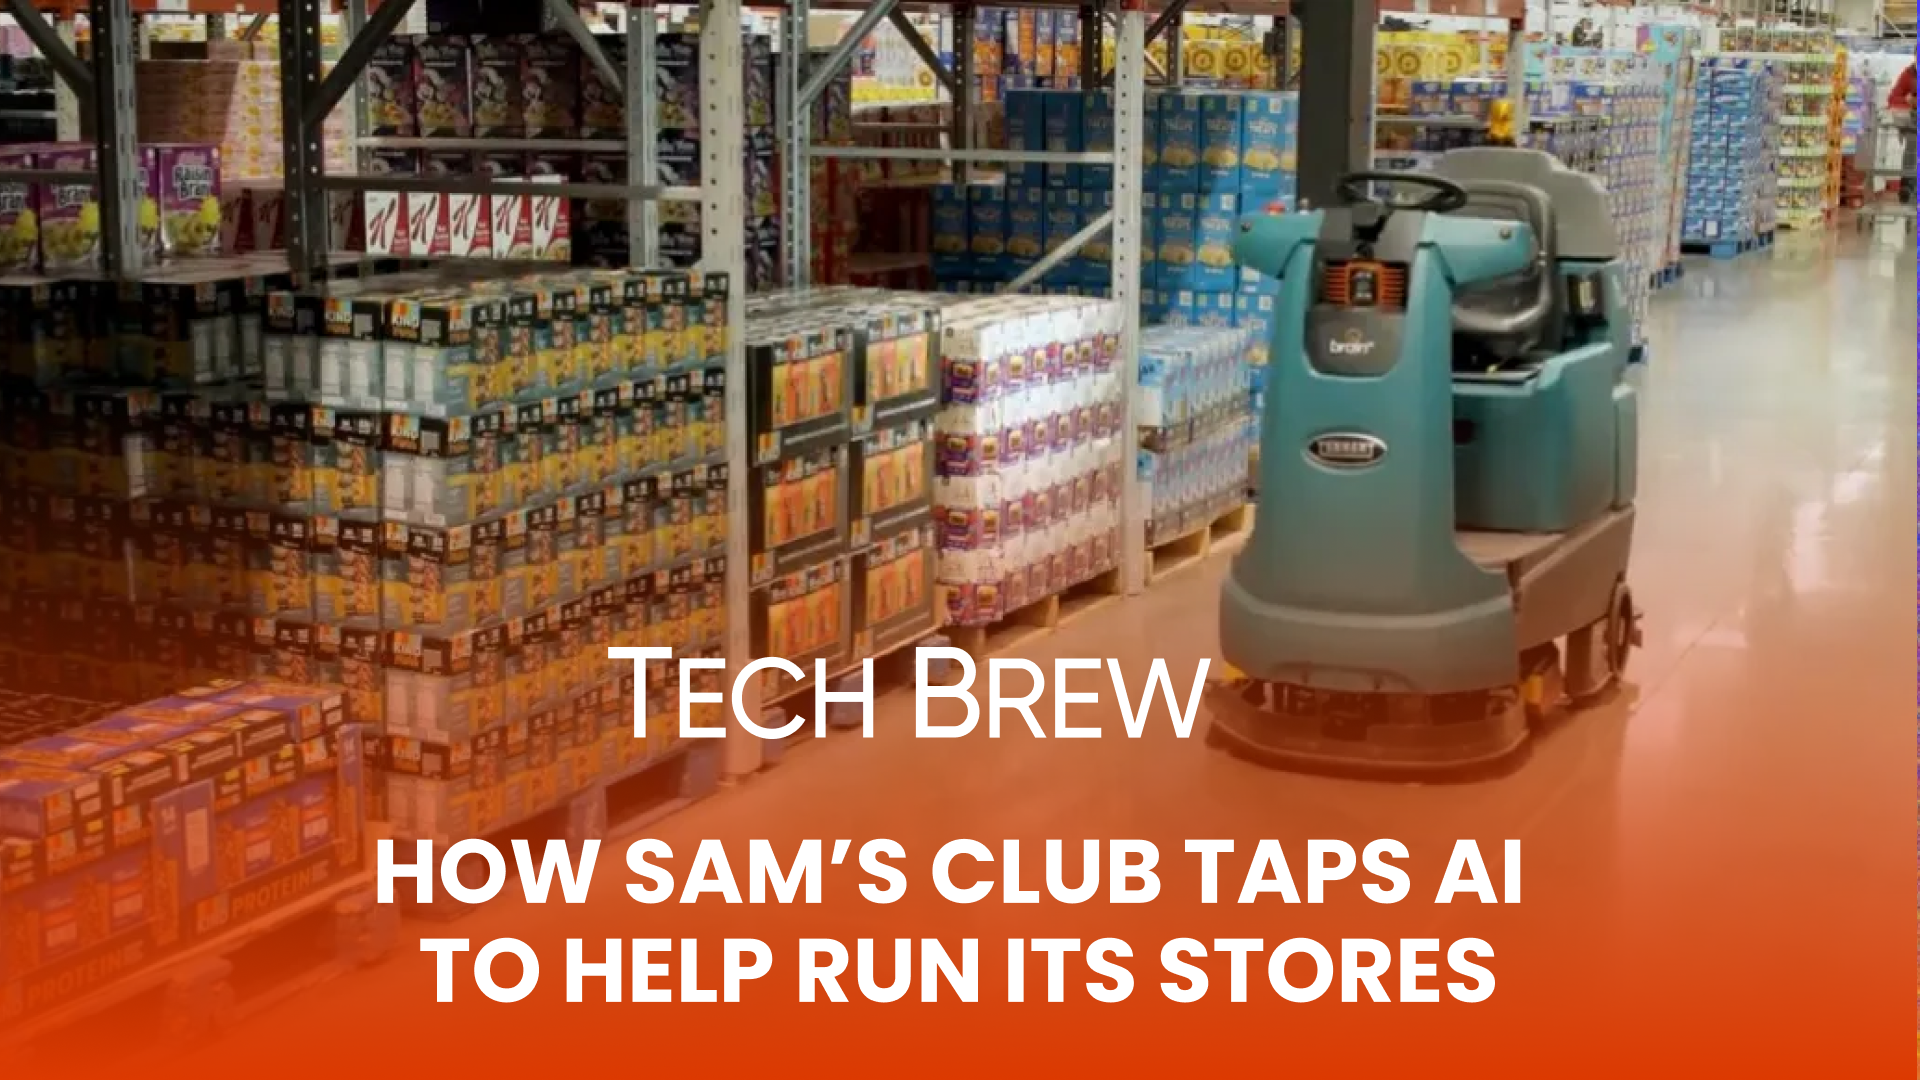 From warehouse autonomous robots to AI algorithms, the big box chain, Sam's Club, is overhauling its operations.